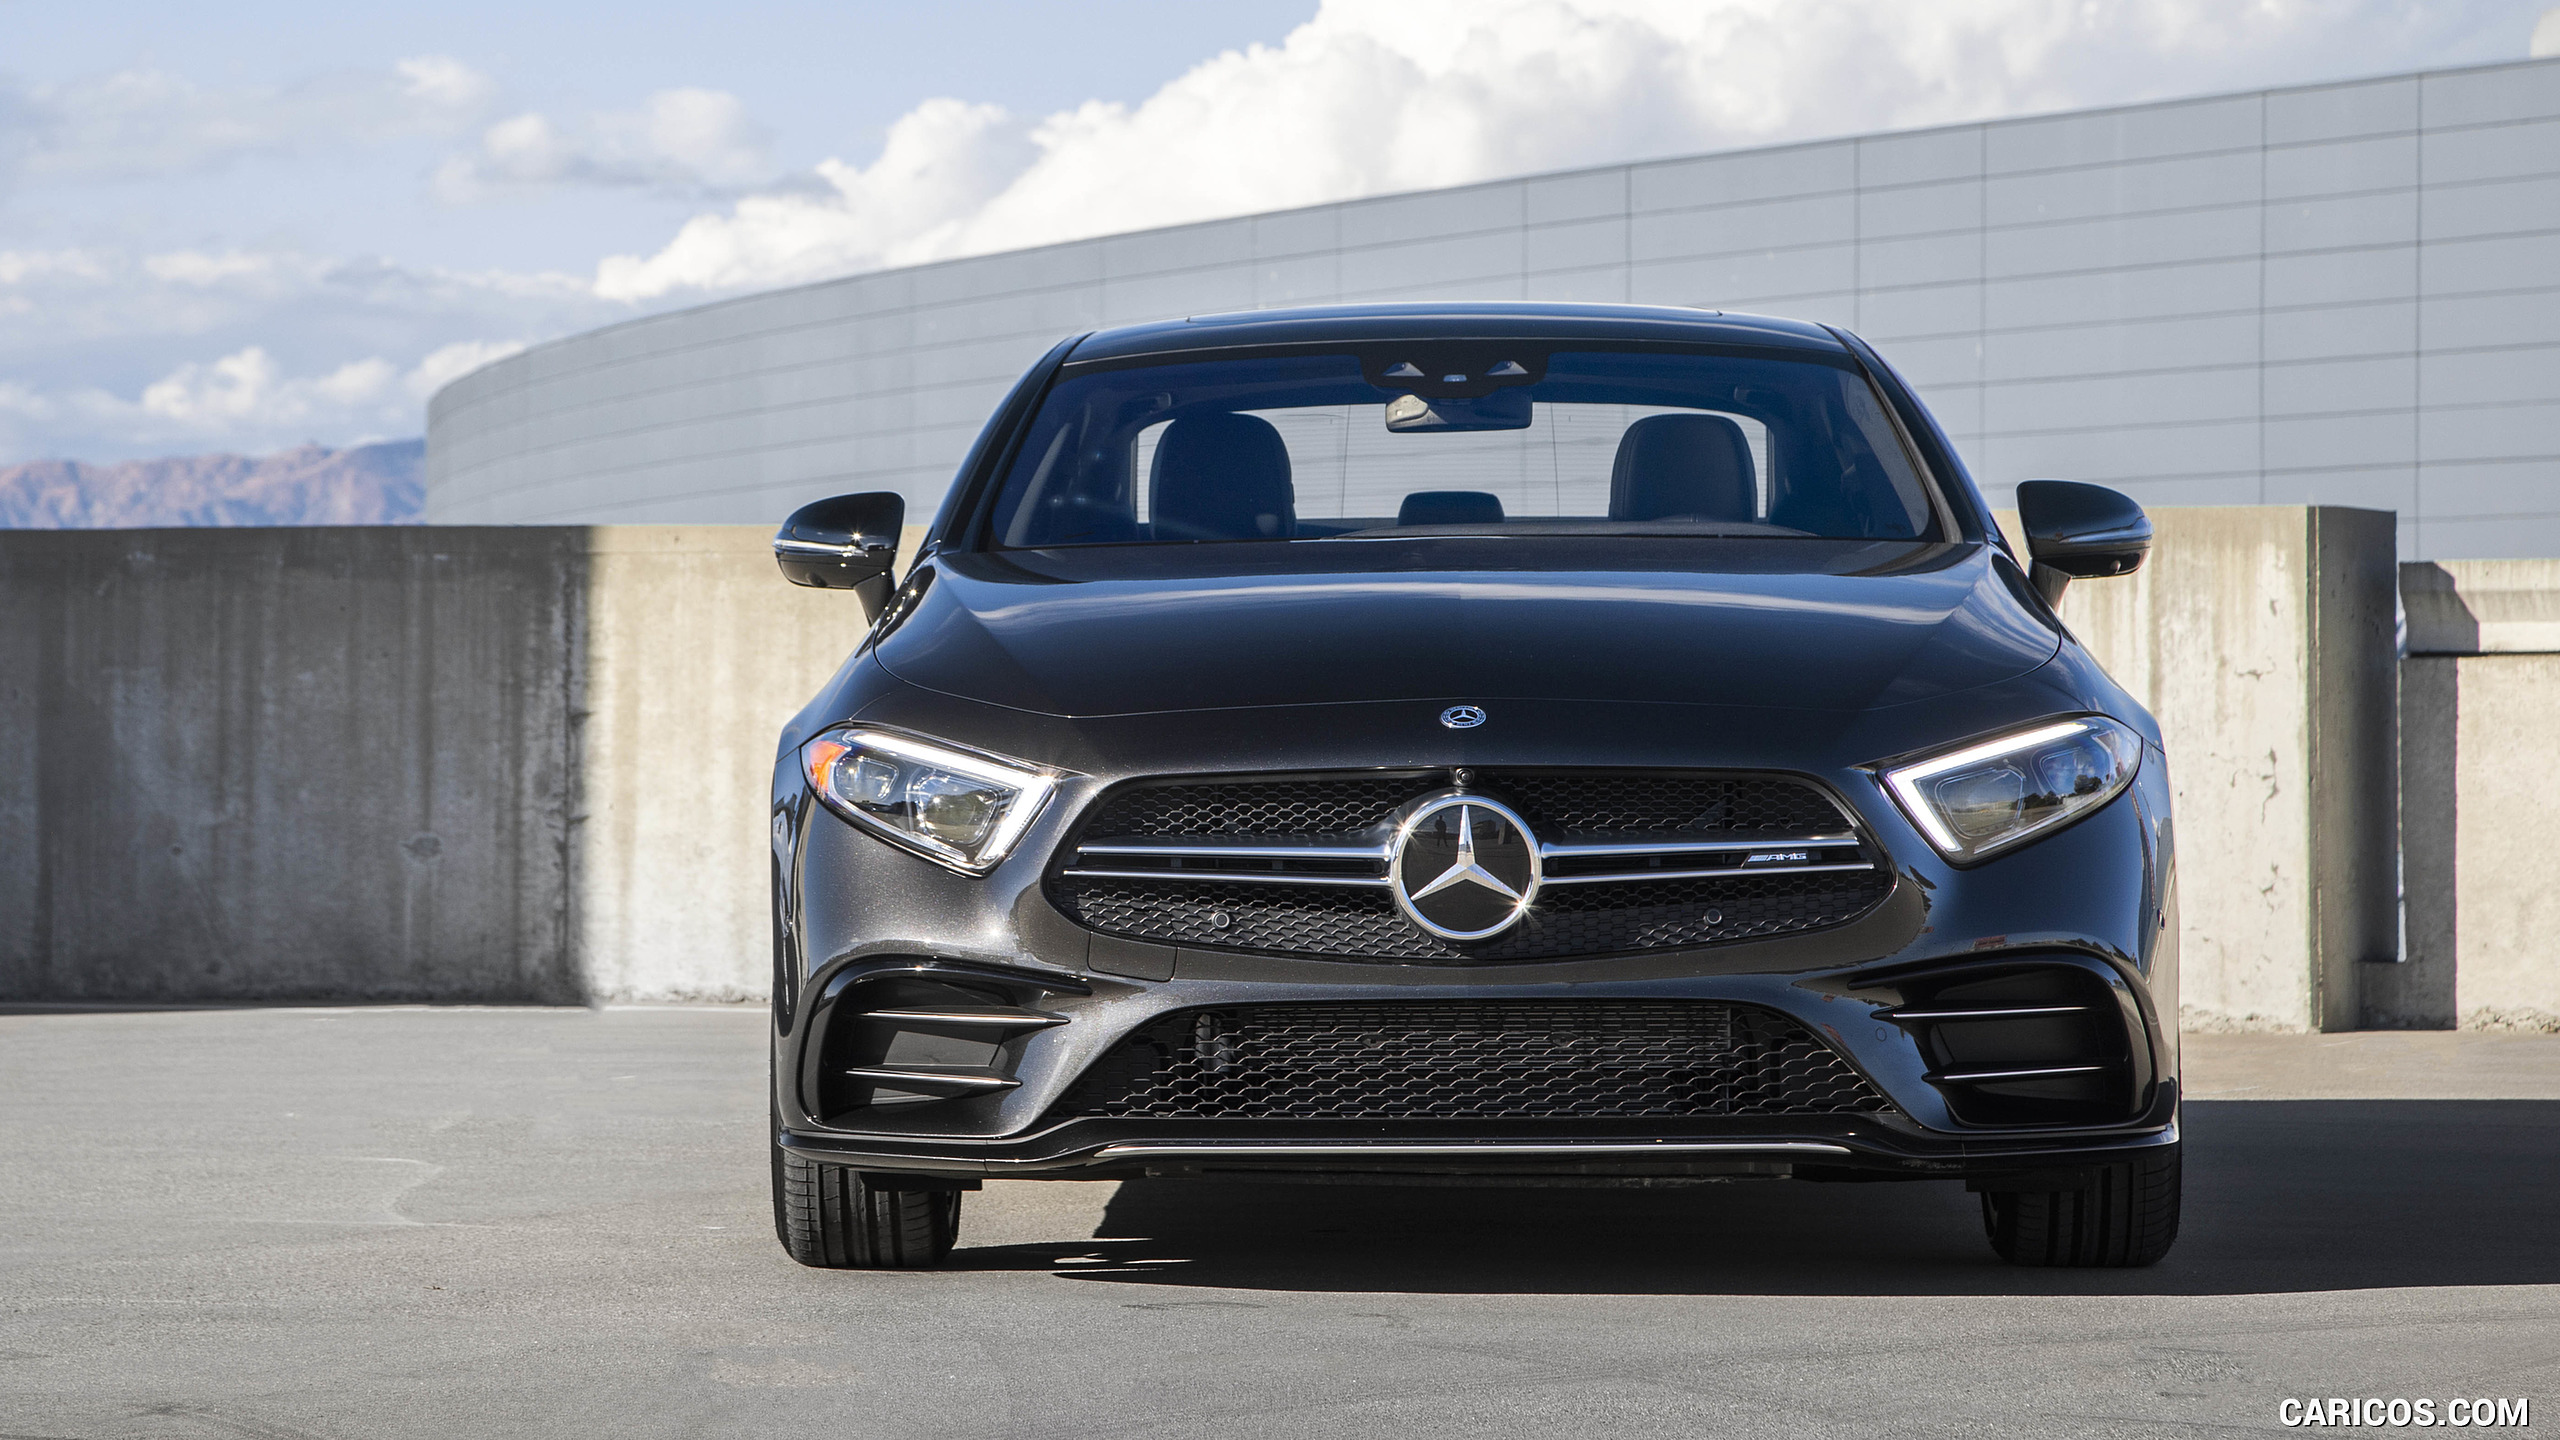 2019 Mercedes-AMG CLS 53 4MATIC+ (US-Spec) - Front, #44 of 84